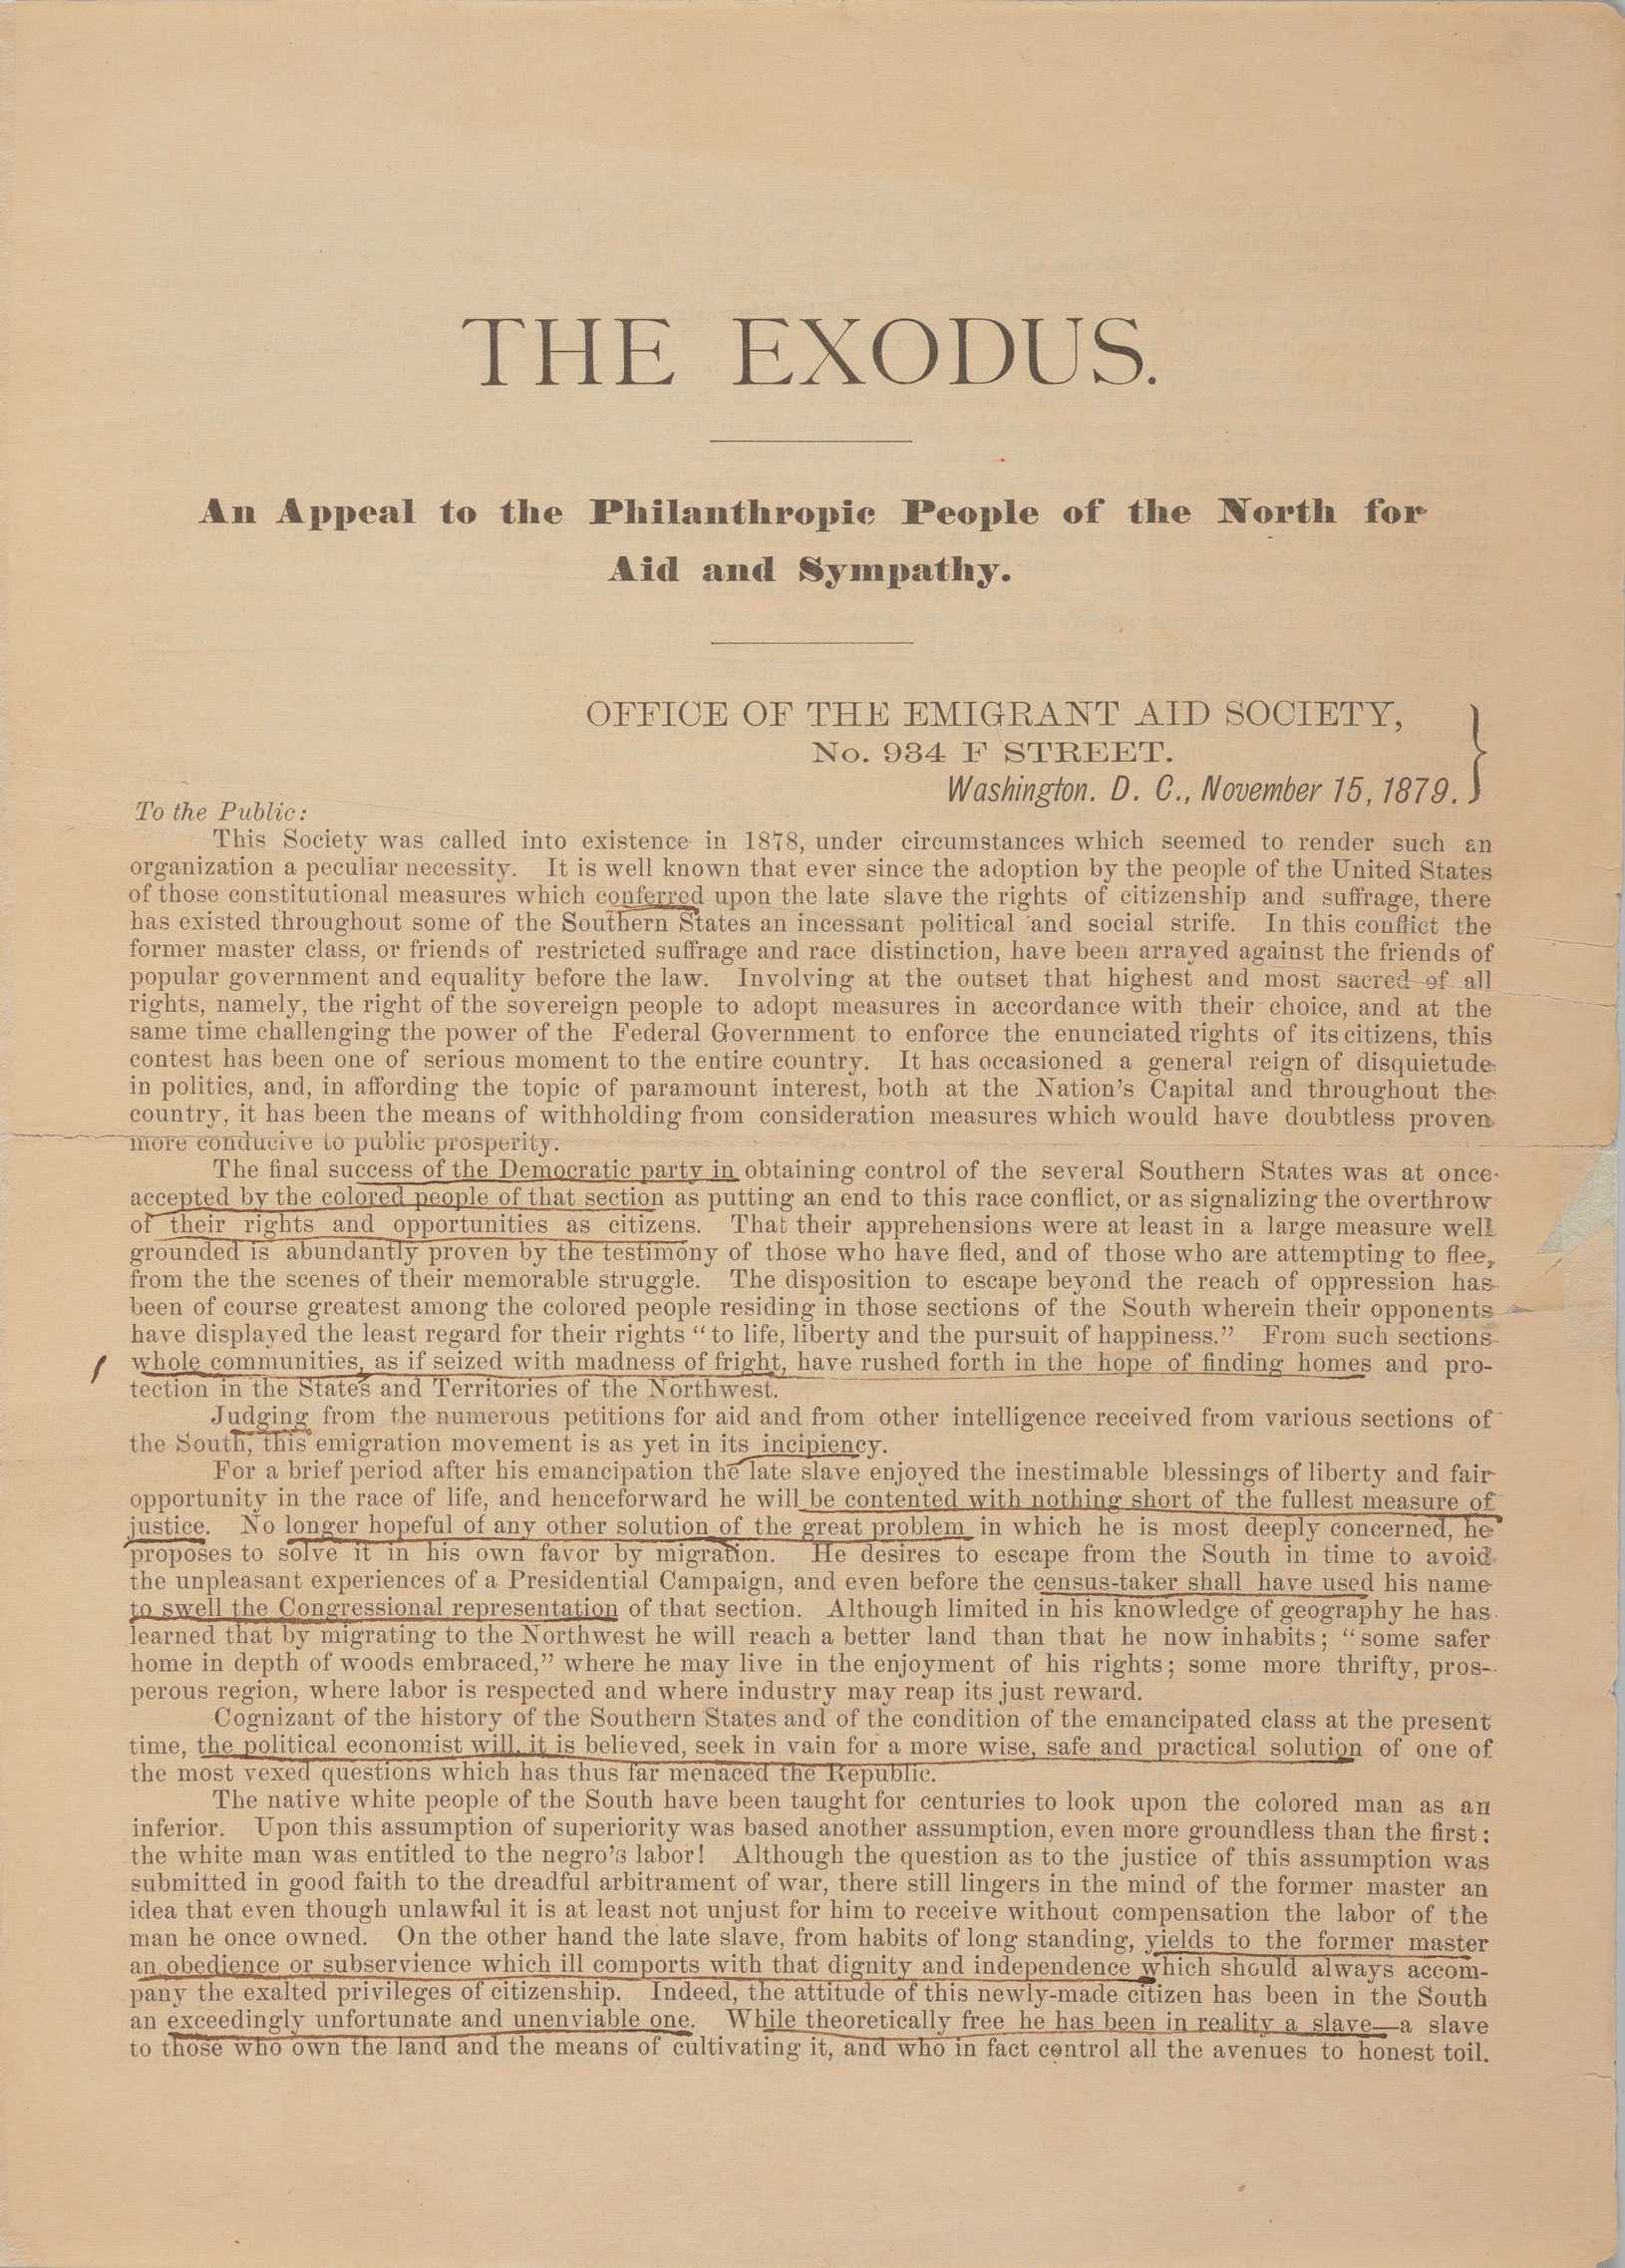 First page of an essay published by the Emigrant Aid Society of Washington, D.C.